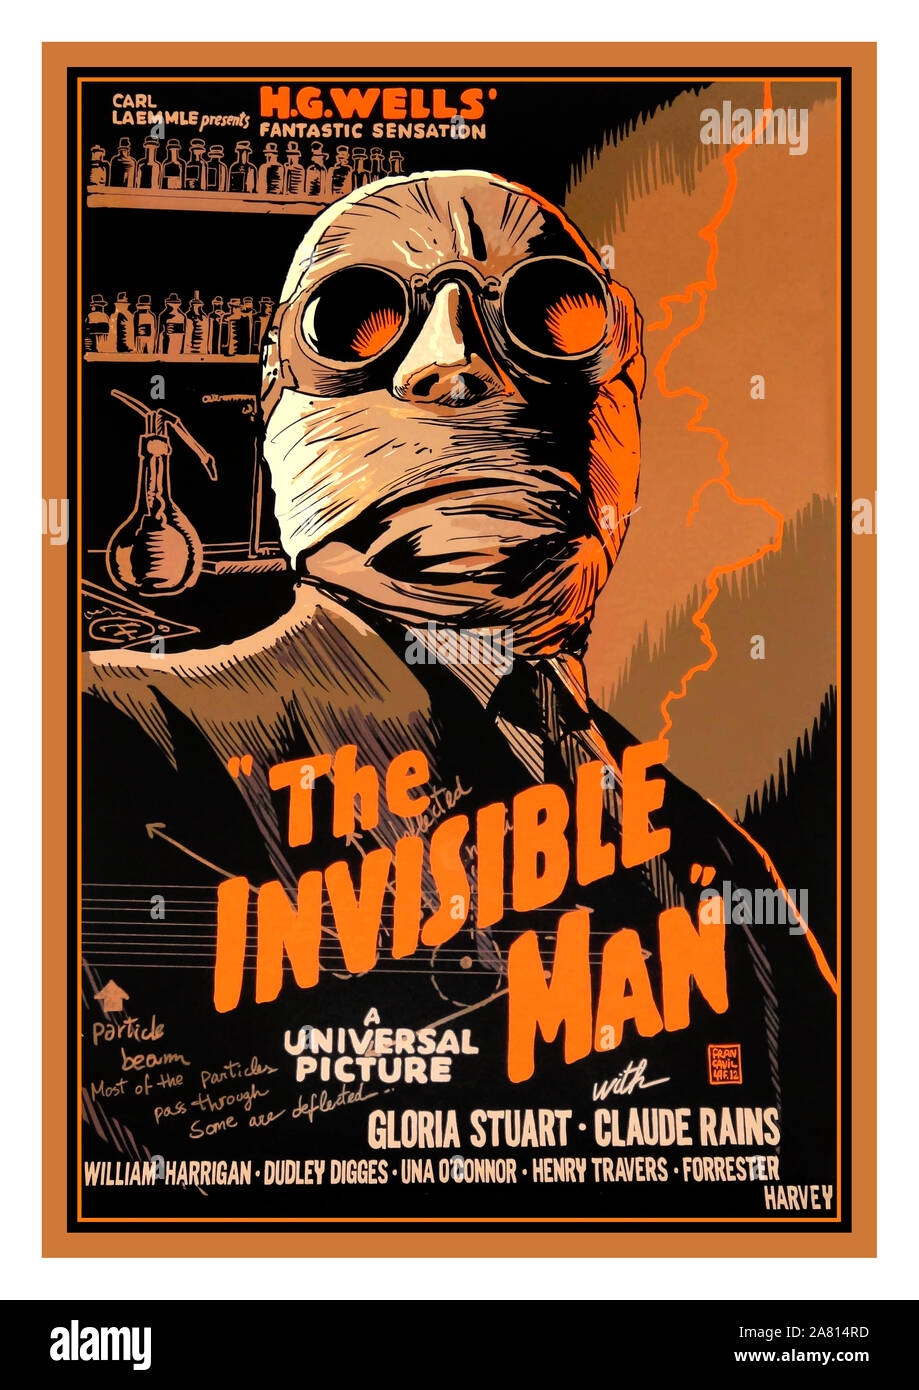 THE INVISIBLE MAN Vintage 1930er Film Movie Poster The Invisible man (1933) HG Wells sci Fi Horror with Gloria Stuart Claude Rains Universal Picters Stockfoto